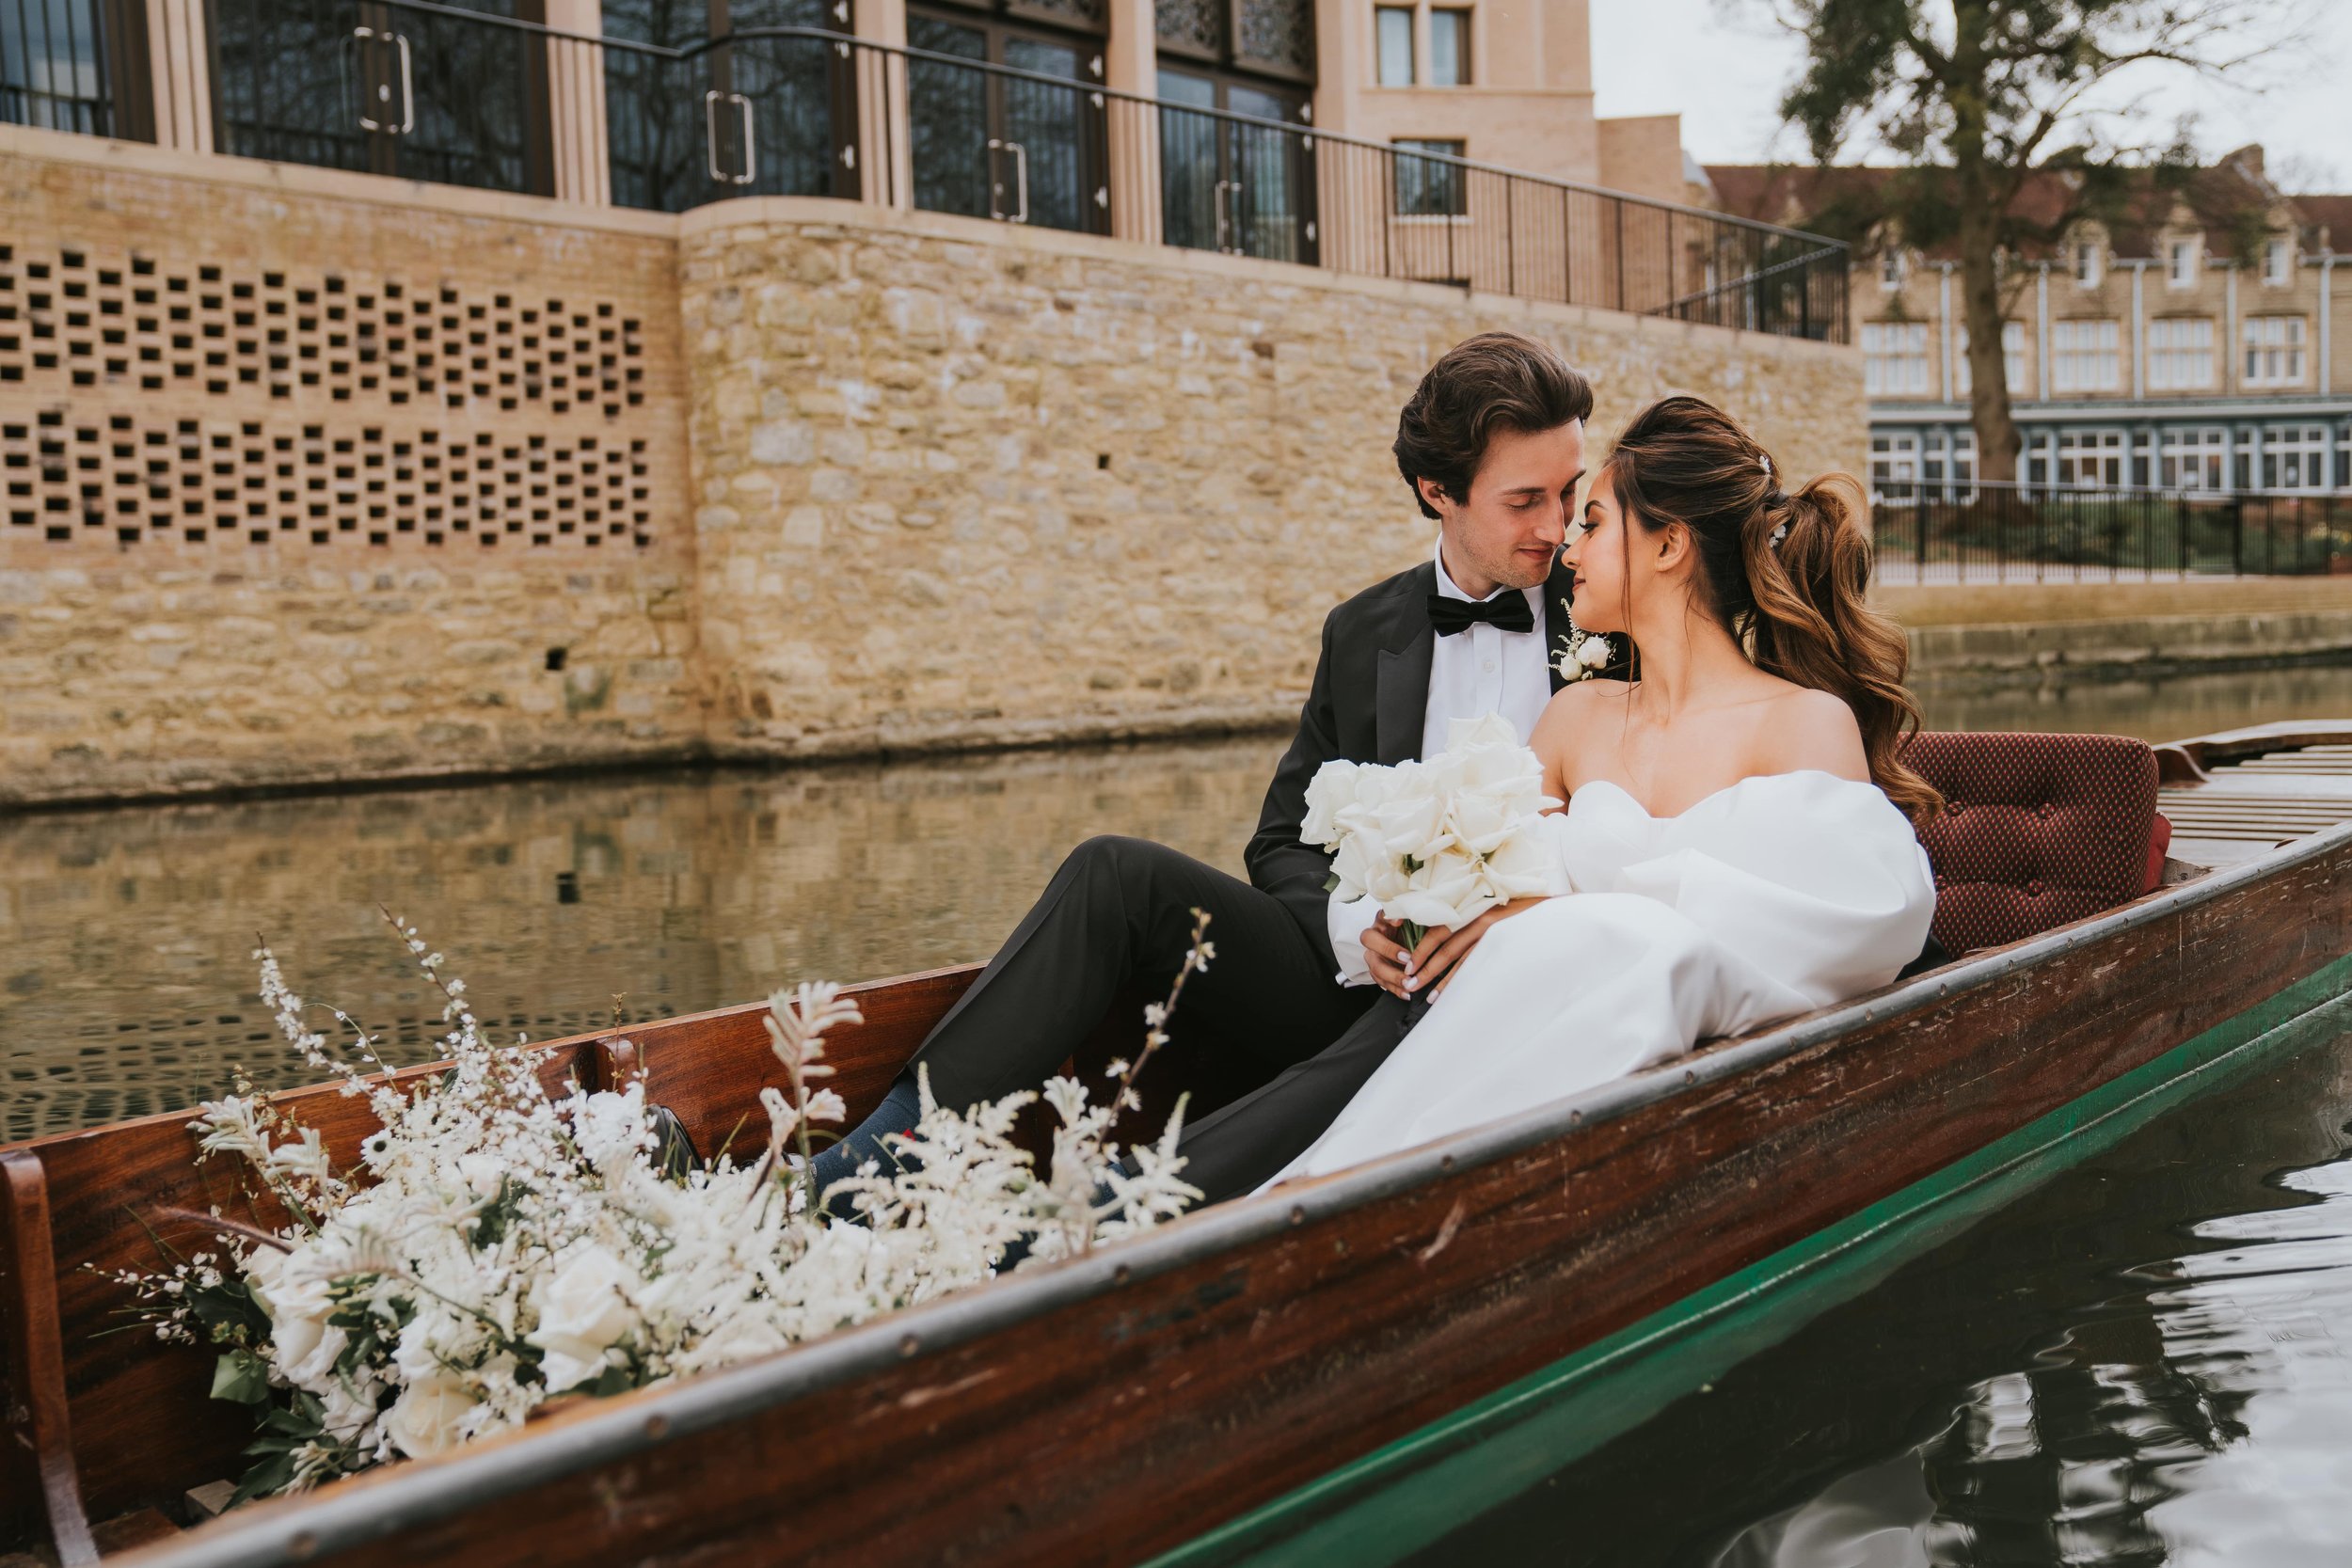 Bride and groom portrait on punting boat